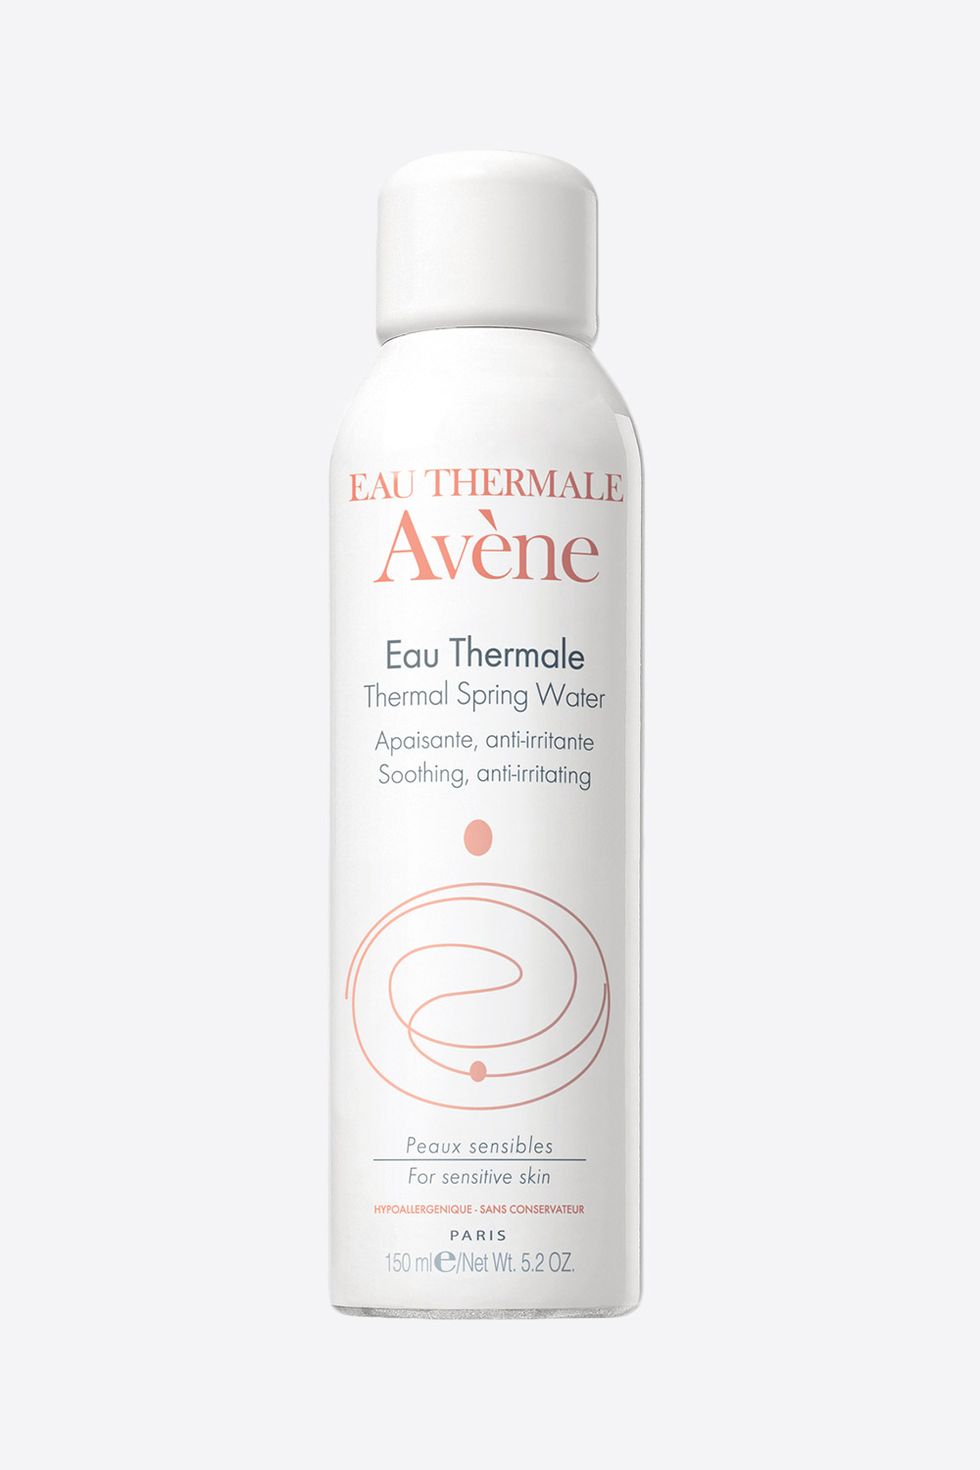 <p>French women, especially those with sensitive skin, are obsessed with thermal water. This beloved spray is gentle enough for a baby and over 150 studies show that it effectively calms and softens skin. Talk about handbag-real-estate worthy...</p><p>Avène Eau Thermale Spring Water, $9; <a href="http://www.drugstore.com/products/prod.asp?pid=193767&catid=182950&aid=338666&aparam=193767&kpid=193767&CAWELAID=120142990000013550&CAGPSPN=pla&CAAGID=15436301413&CATCI=pla-112542614653" target="_blank">drugstore.com</a>.</p>